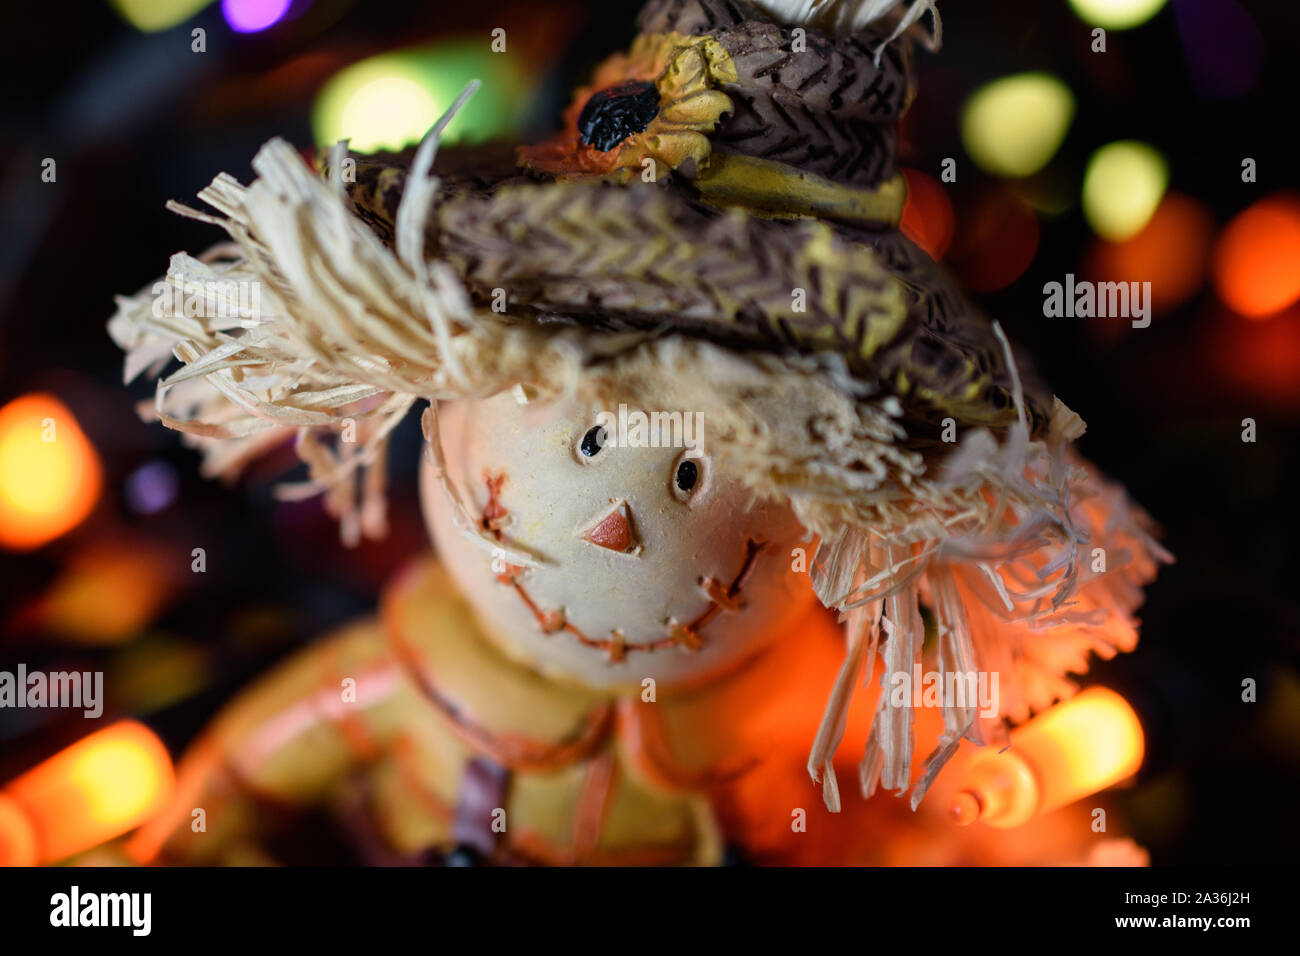 Closeup of Adorable Scarecrow Face illuminated by Halloween Led Lights Stock Photo